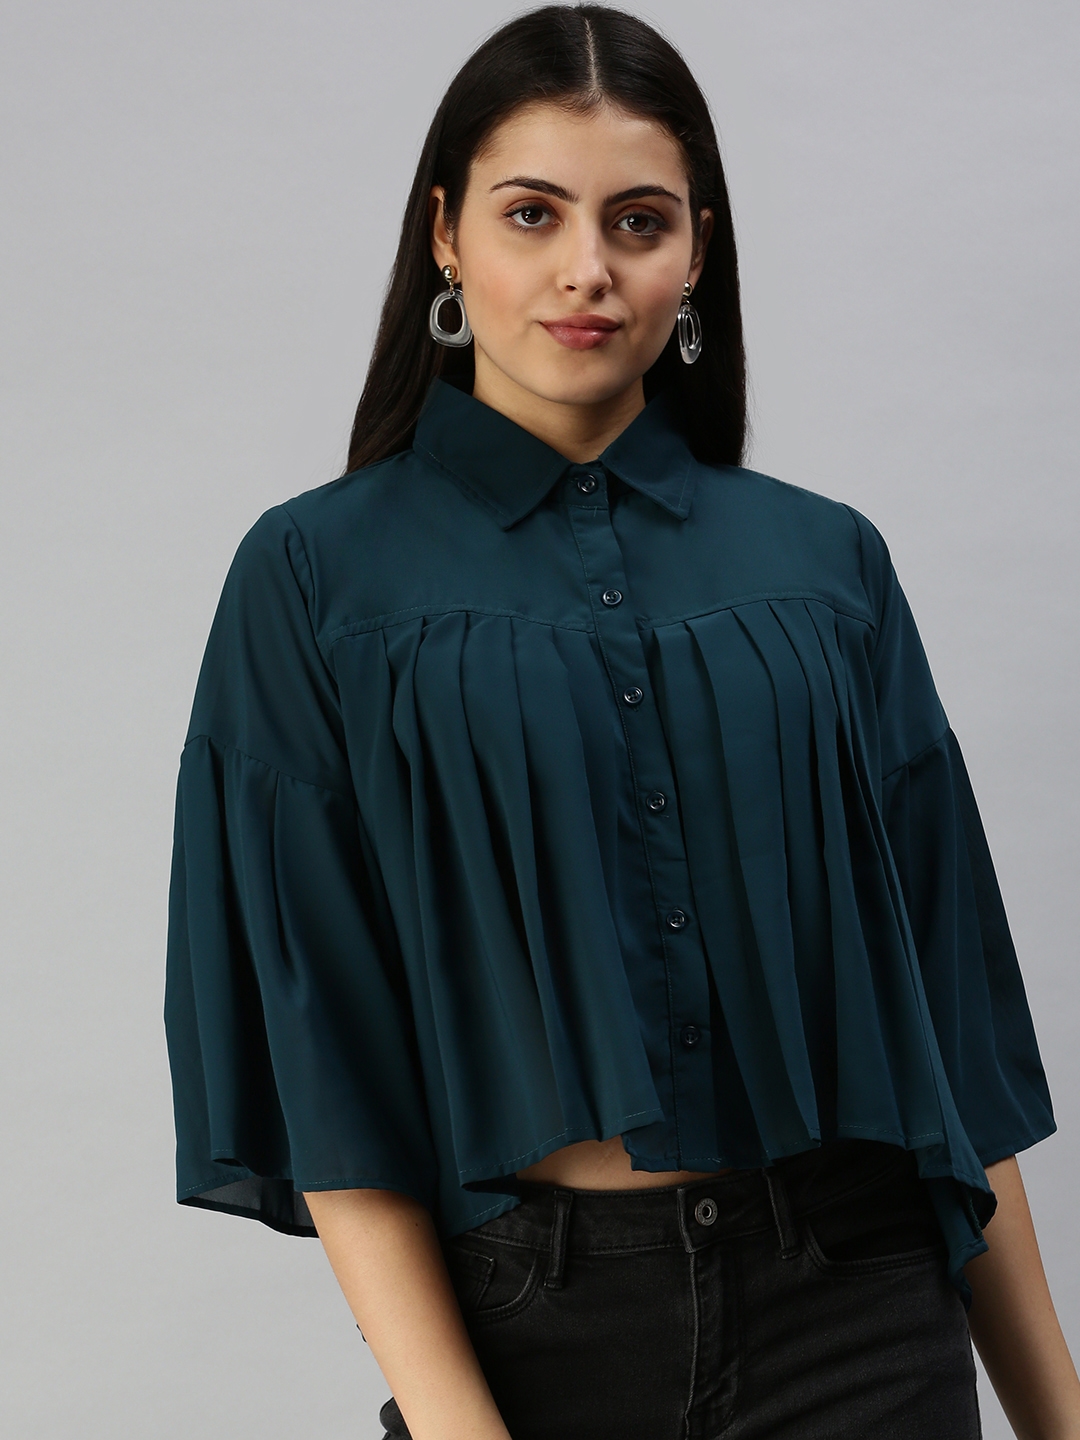 Showoff | SHOWOFF Women's Three-Quarter Sleeves Shirt Collar Teal Solid Top